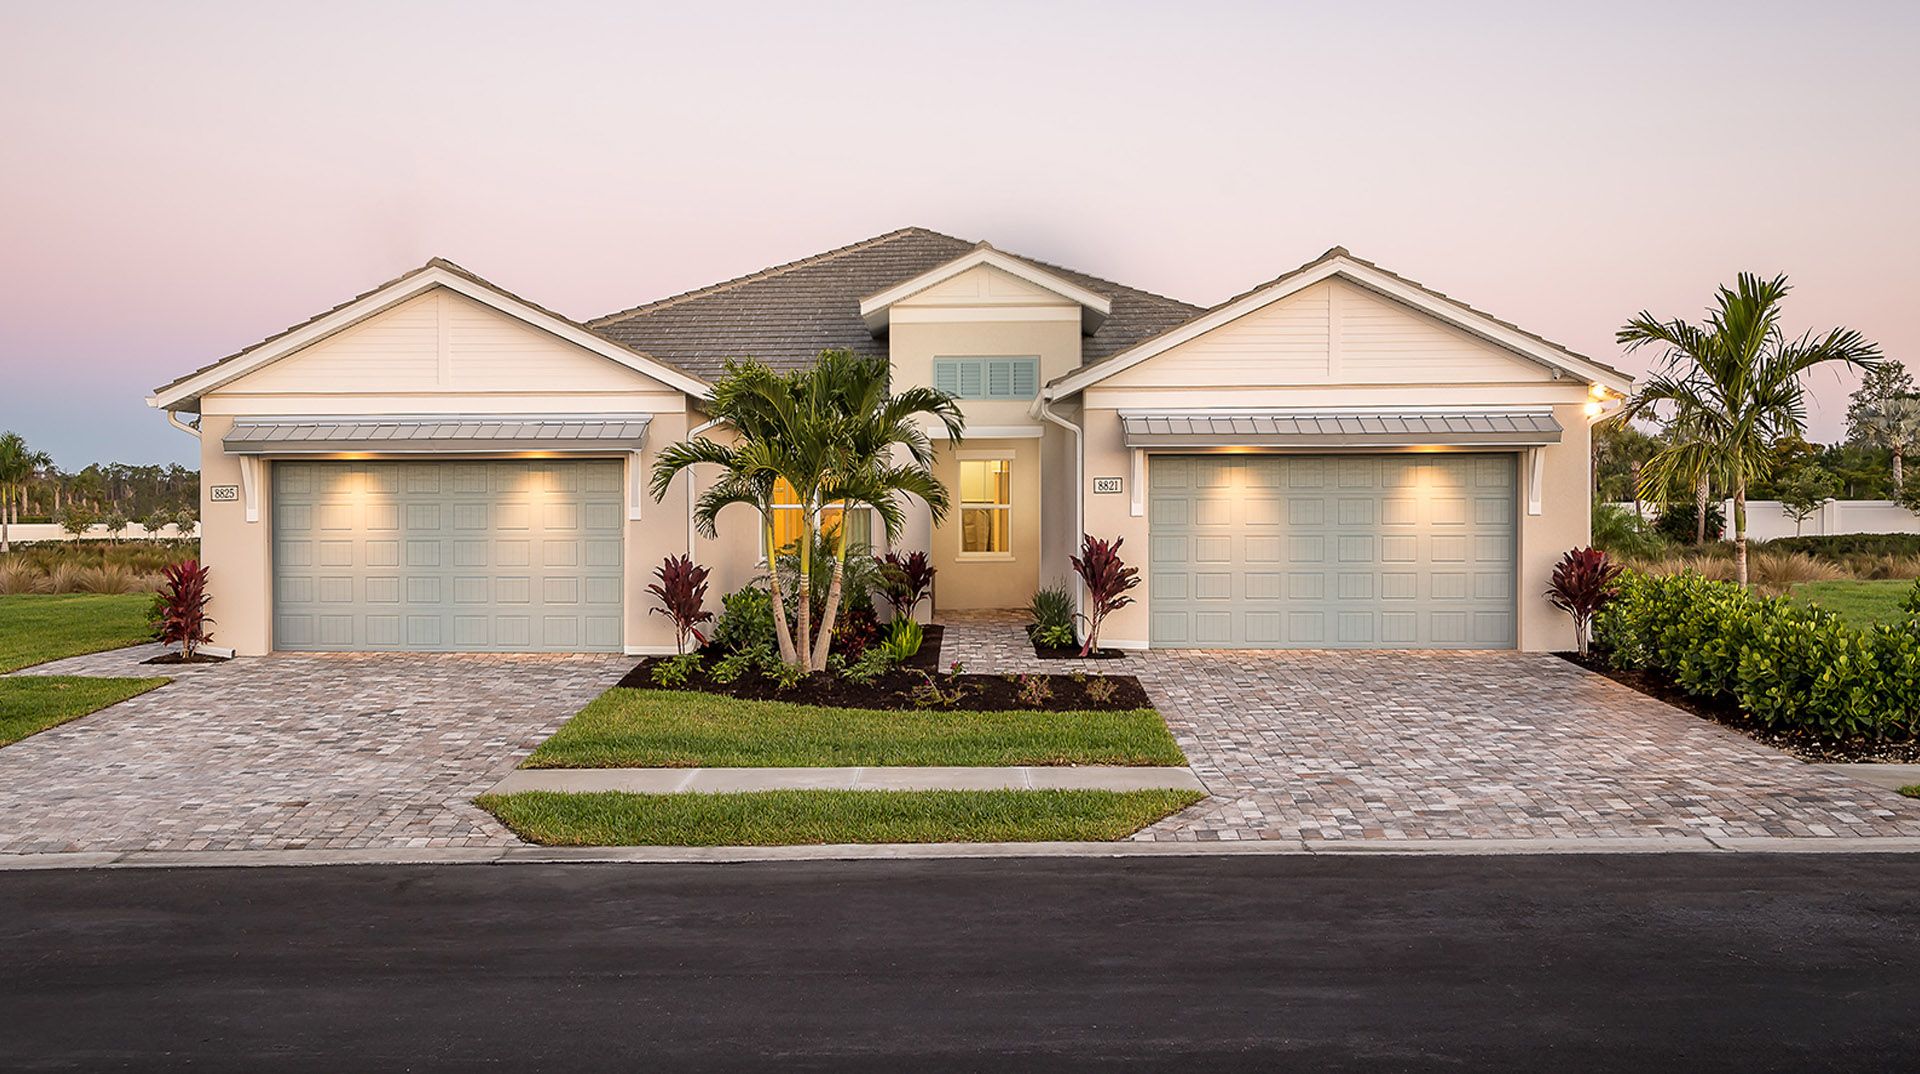 port st. lucie mortgage, mortgage rates port st. lucie, hutchinson island mortgage broker, port st. lucie mortgage lender, port st. lucie mortgage calculator, port st. lucie condo financing, port st. lucie condotel financing, port st. lucie condo mortgage, port st. lucie condotel mortgage,